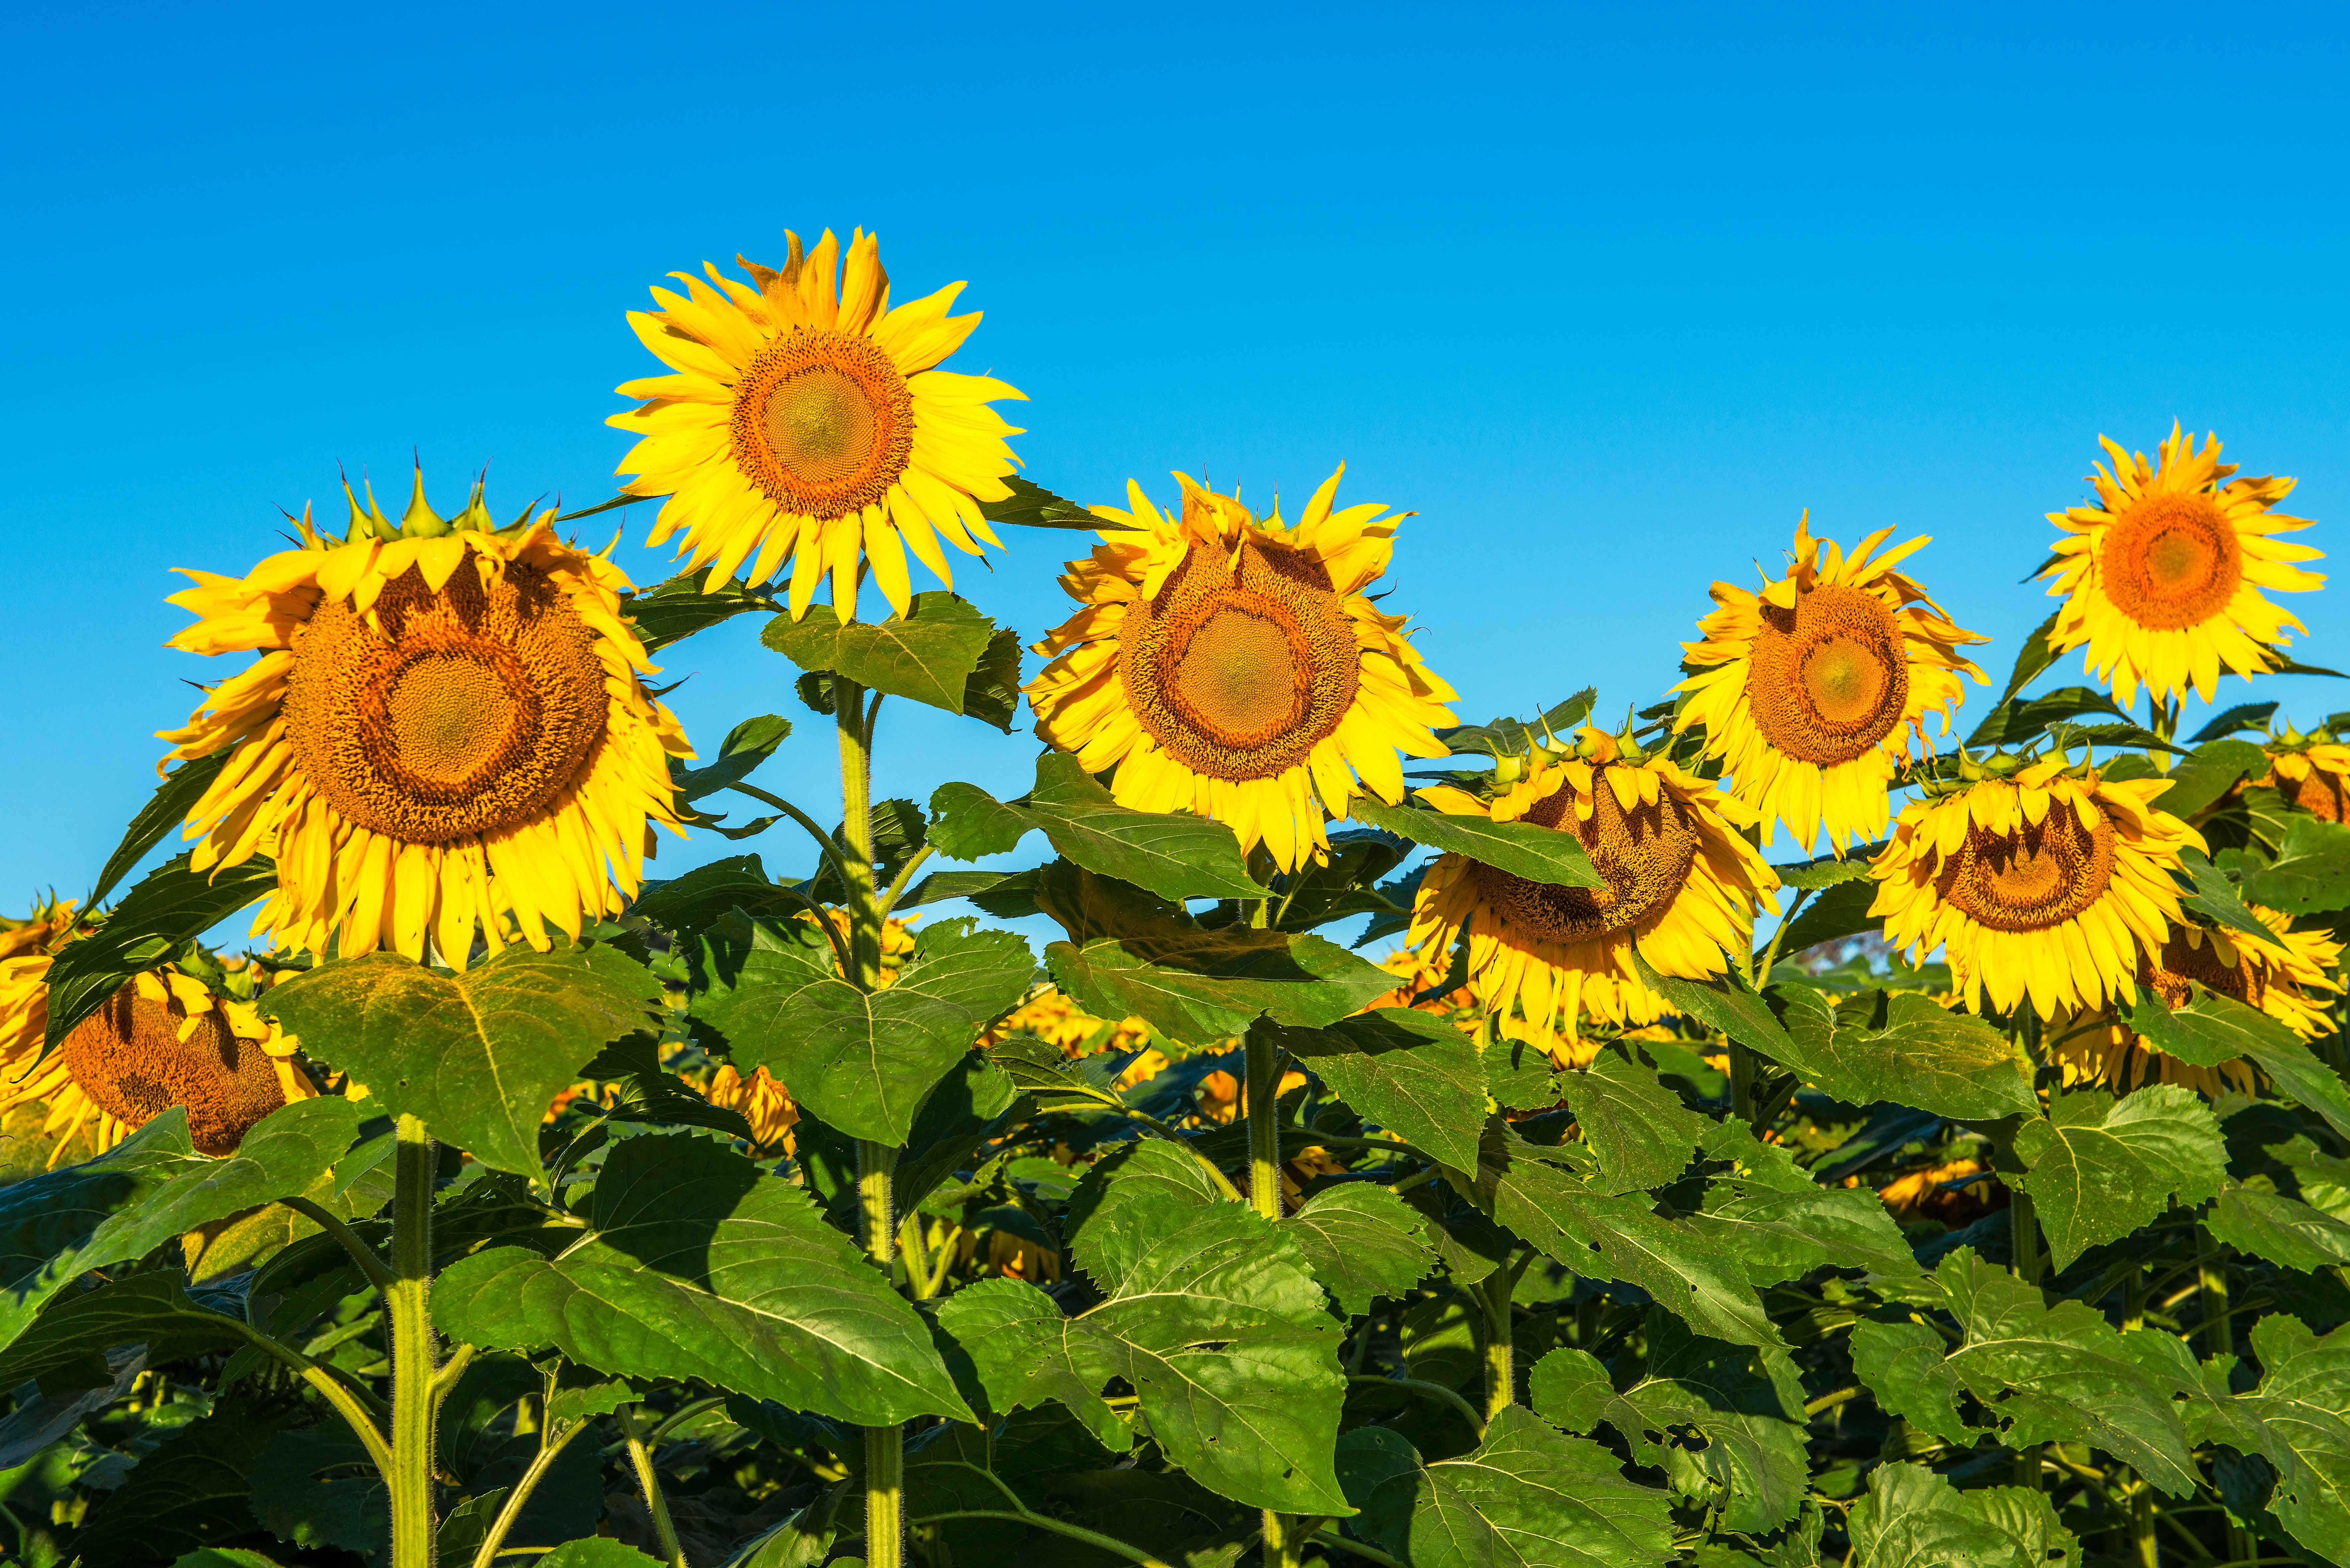 Sunflower Group Tumblr Iphone Wallpaper Hd Images For Mobile Phones ...